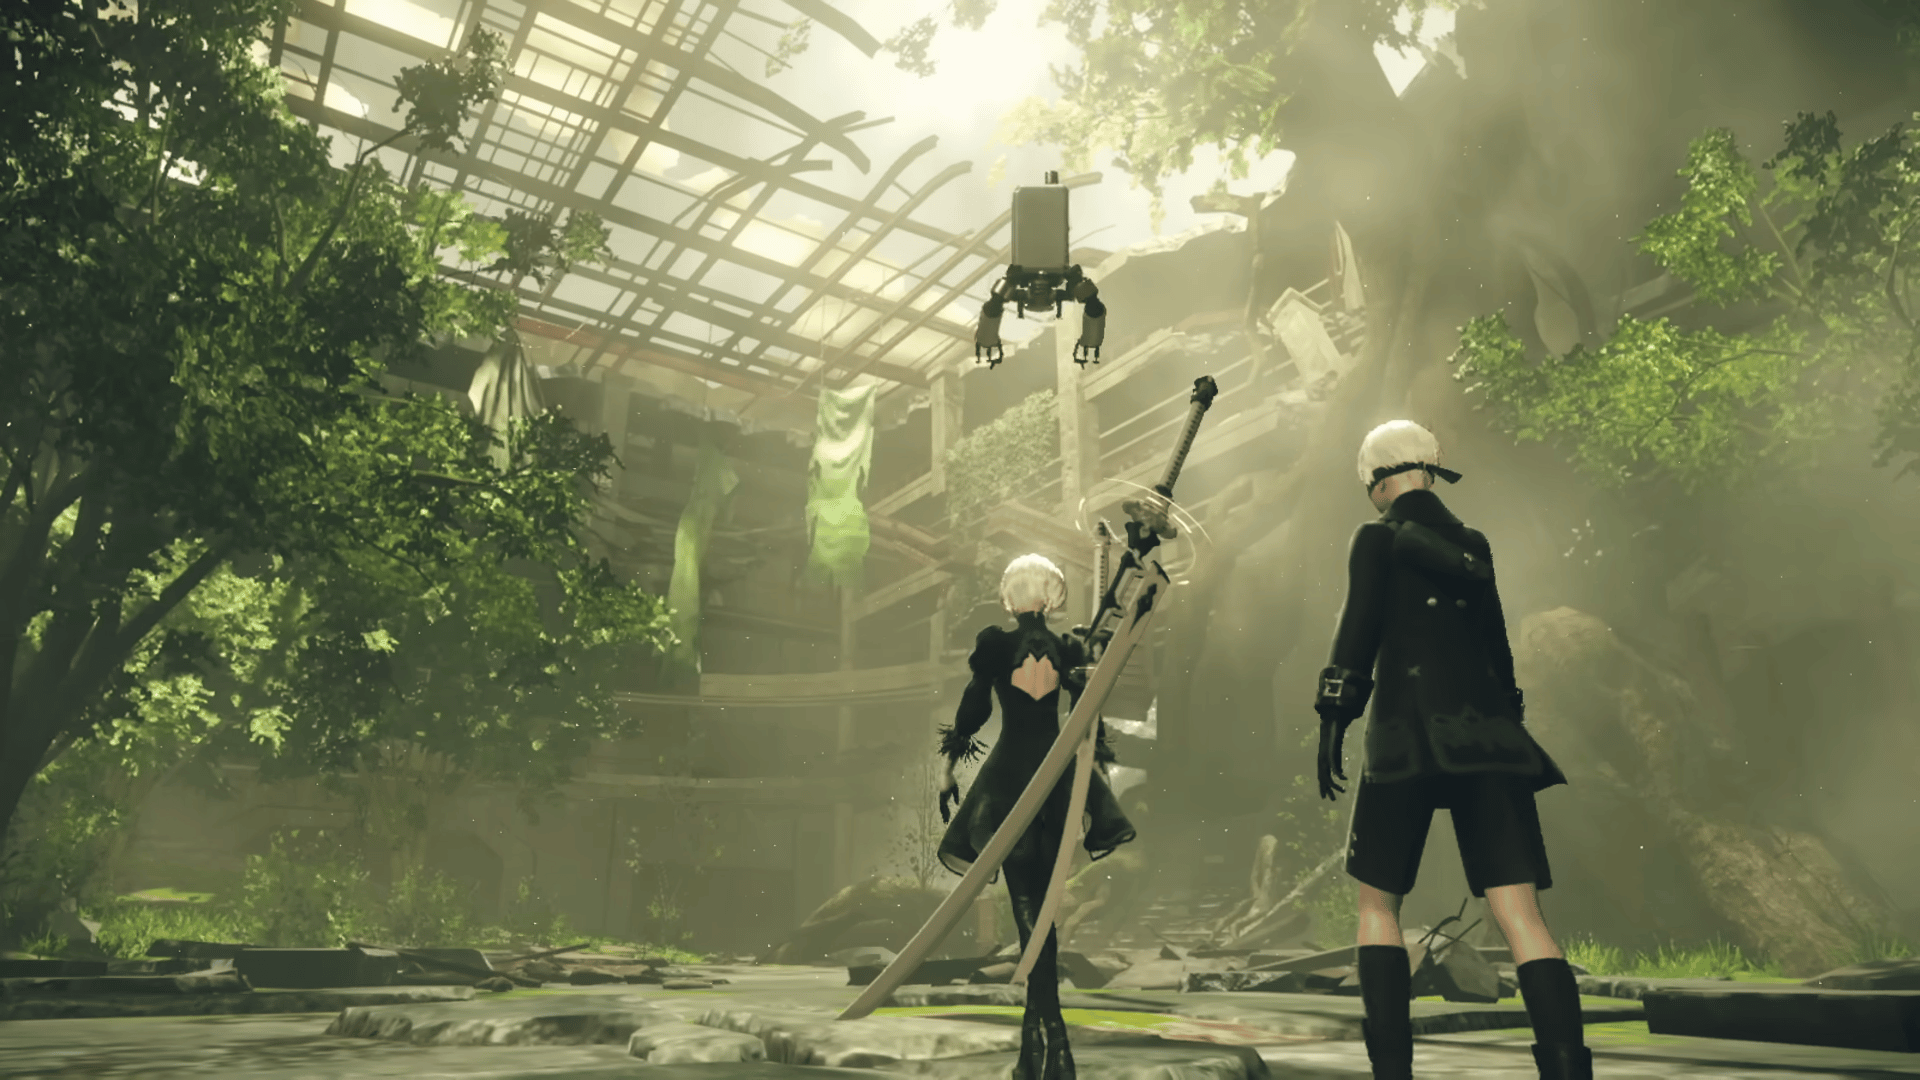 NieR:Automata The End of YoRHa Edition Shares New Trailer; 50-Minute English Subtitled Staff Broadcast